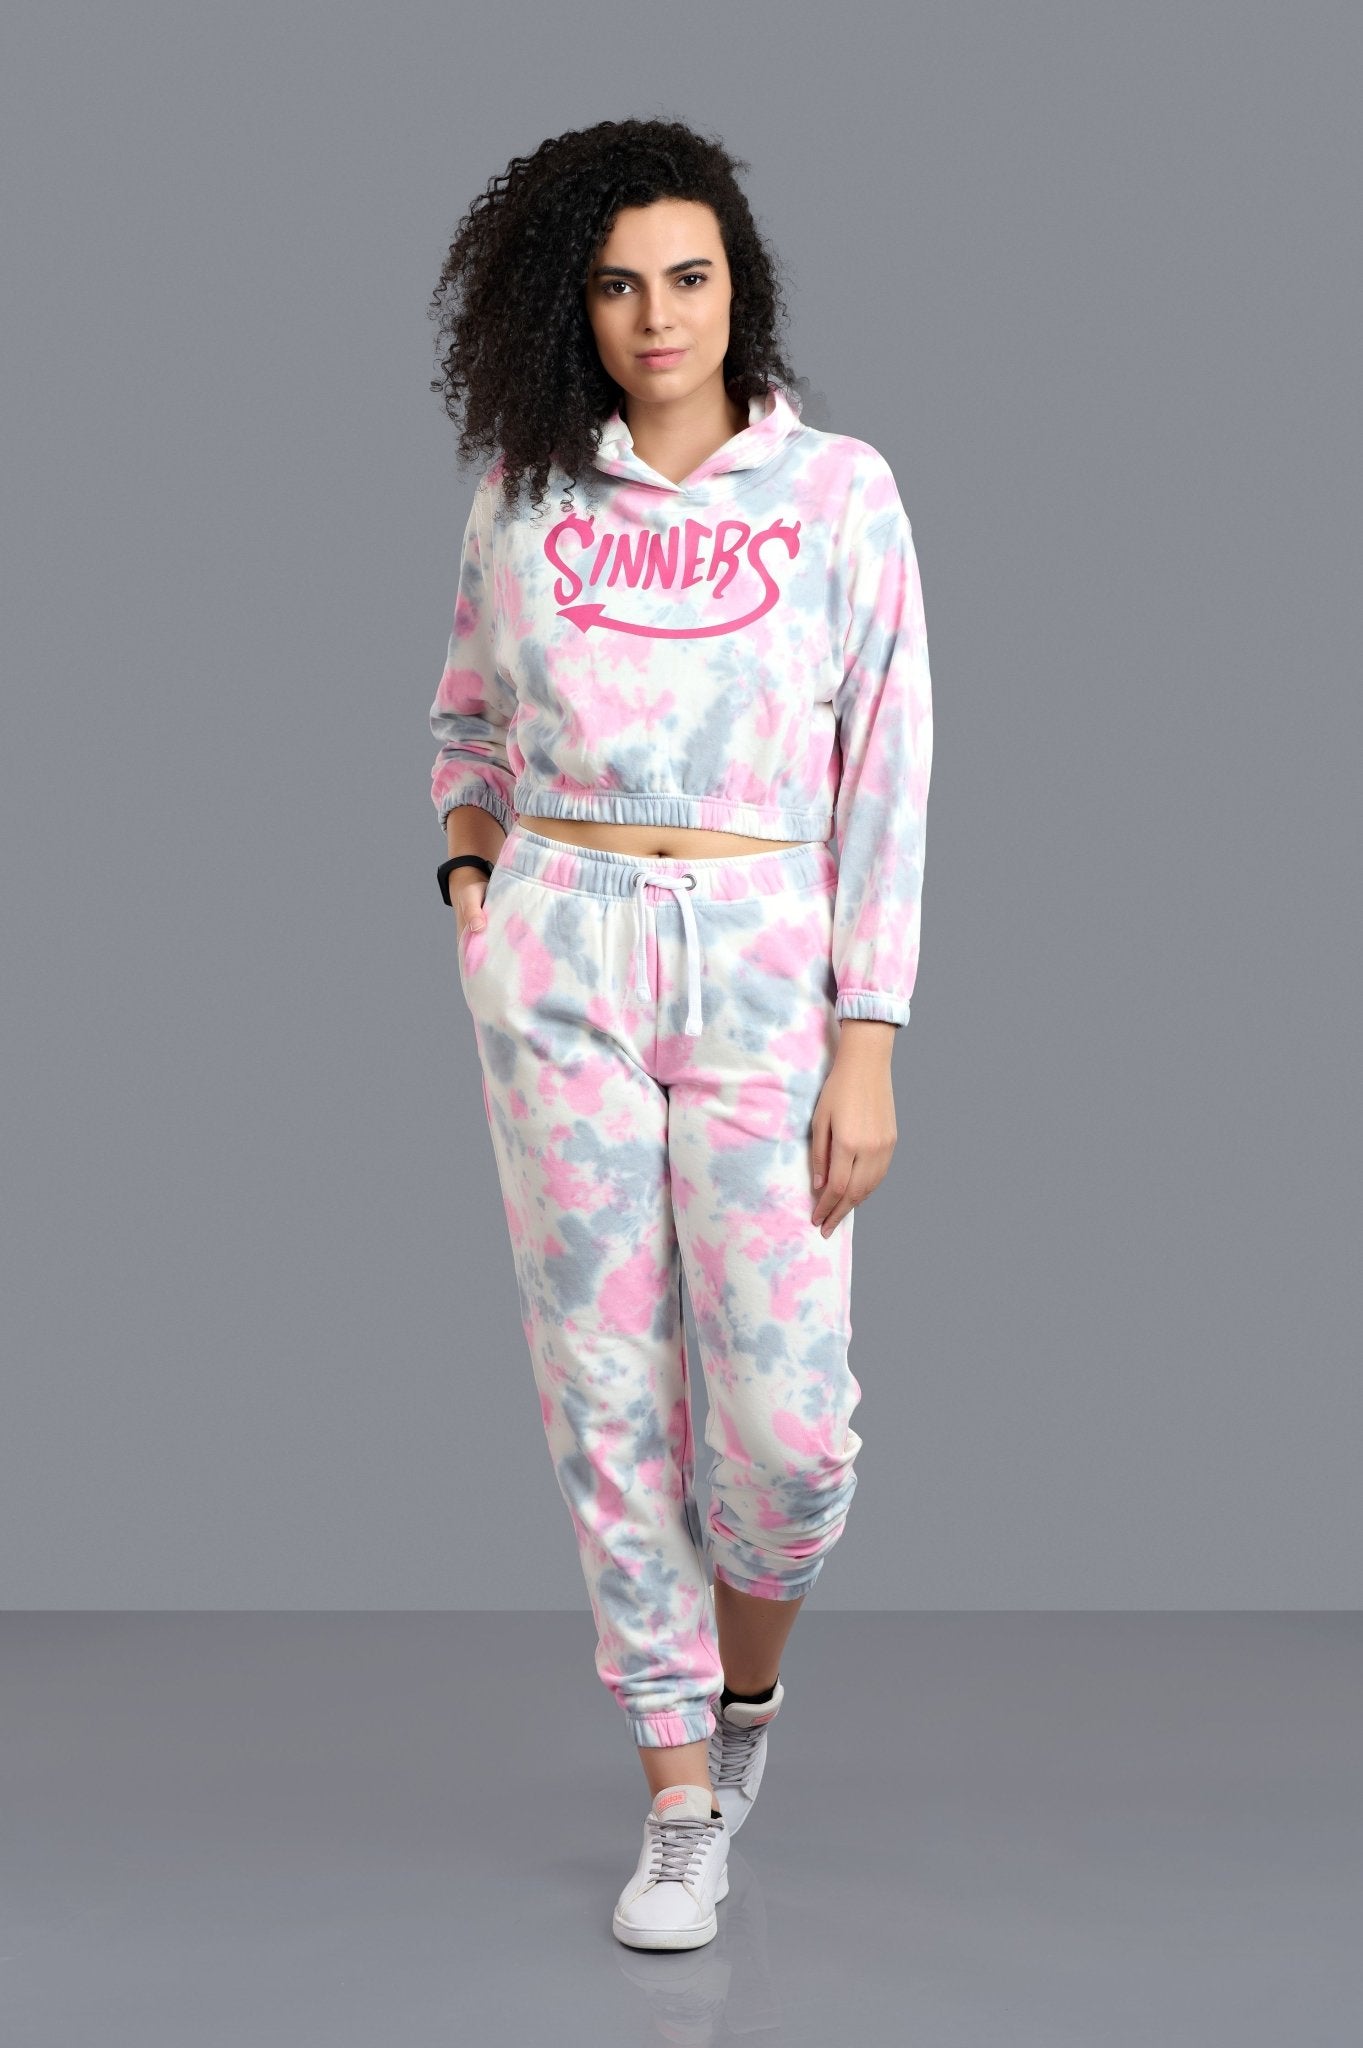 Sinners Printed Multi-color Co-ord Set for Women - Go Devil